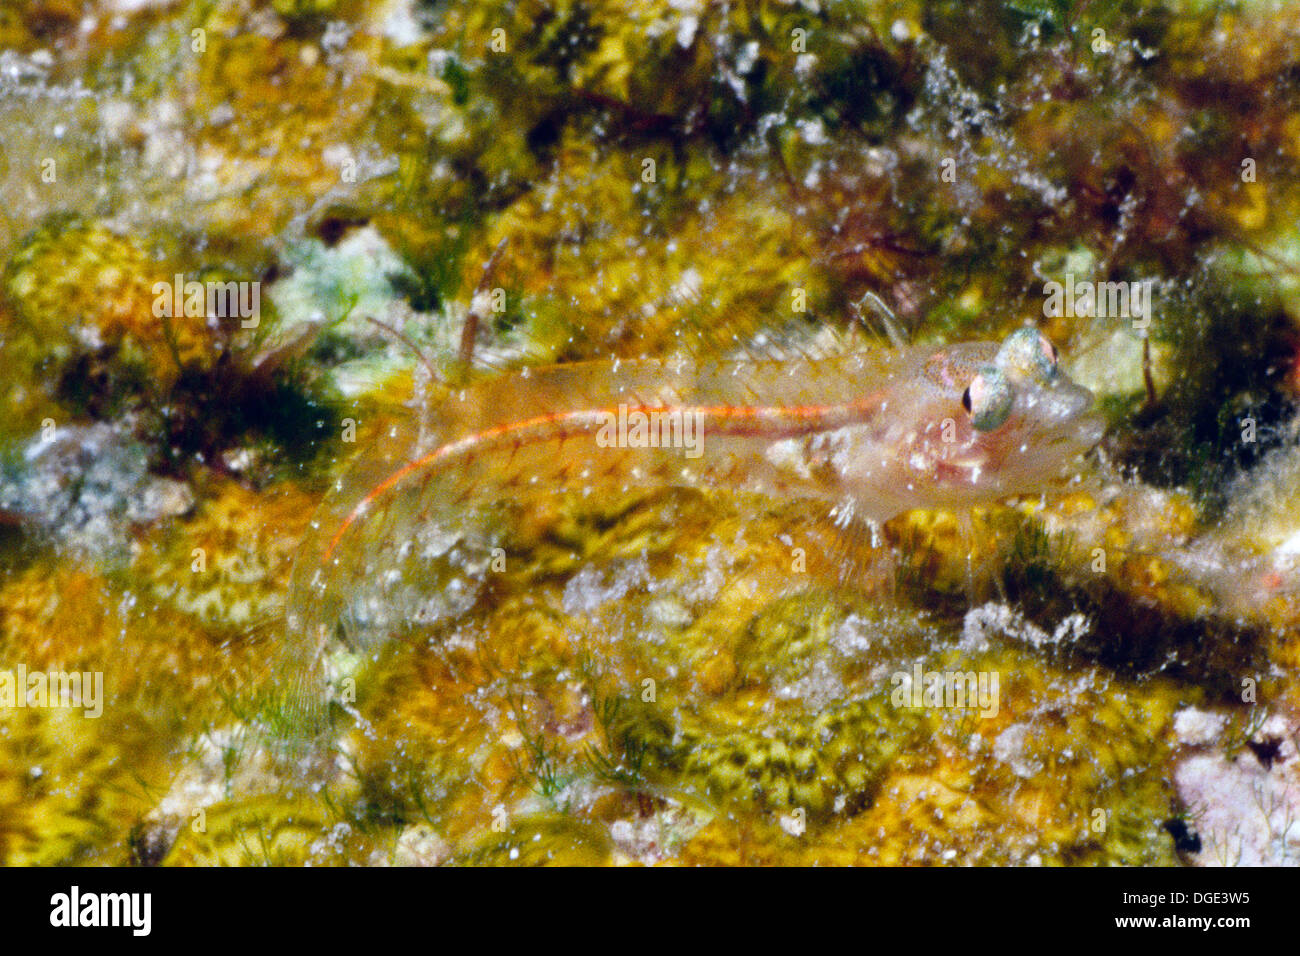 Birdled Goby is transparent showing its spine and bones.(Coryphopterus glaucofraenum).Bonaire Stock Photo